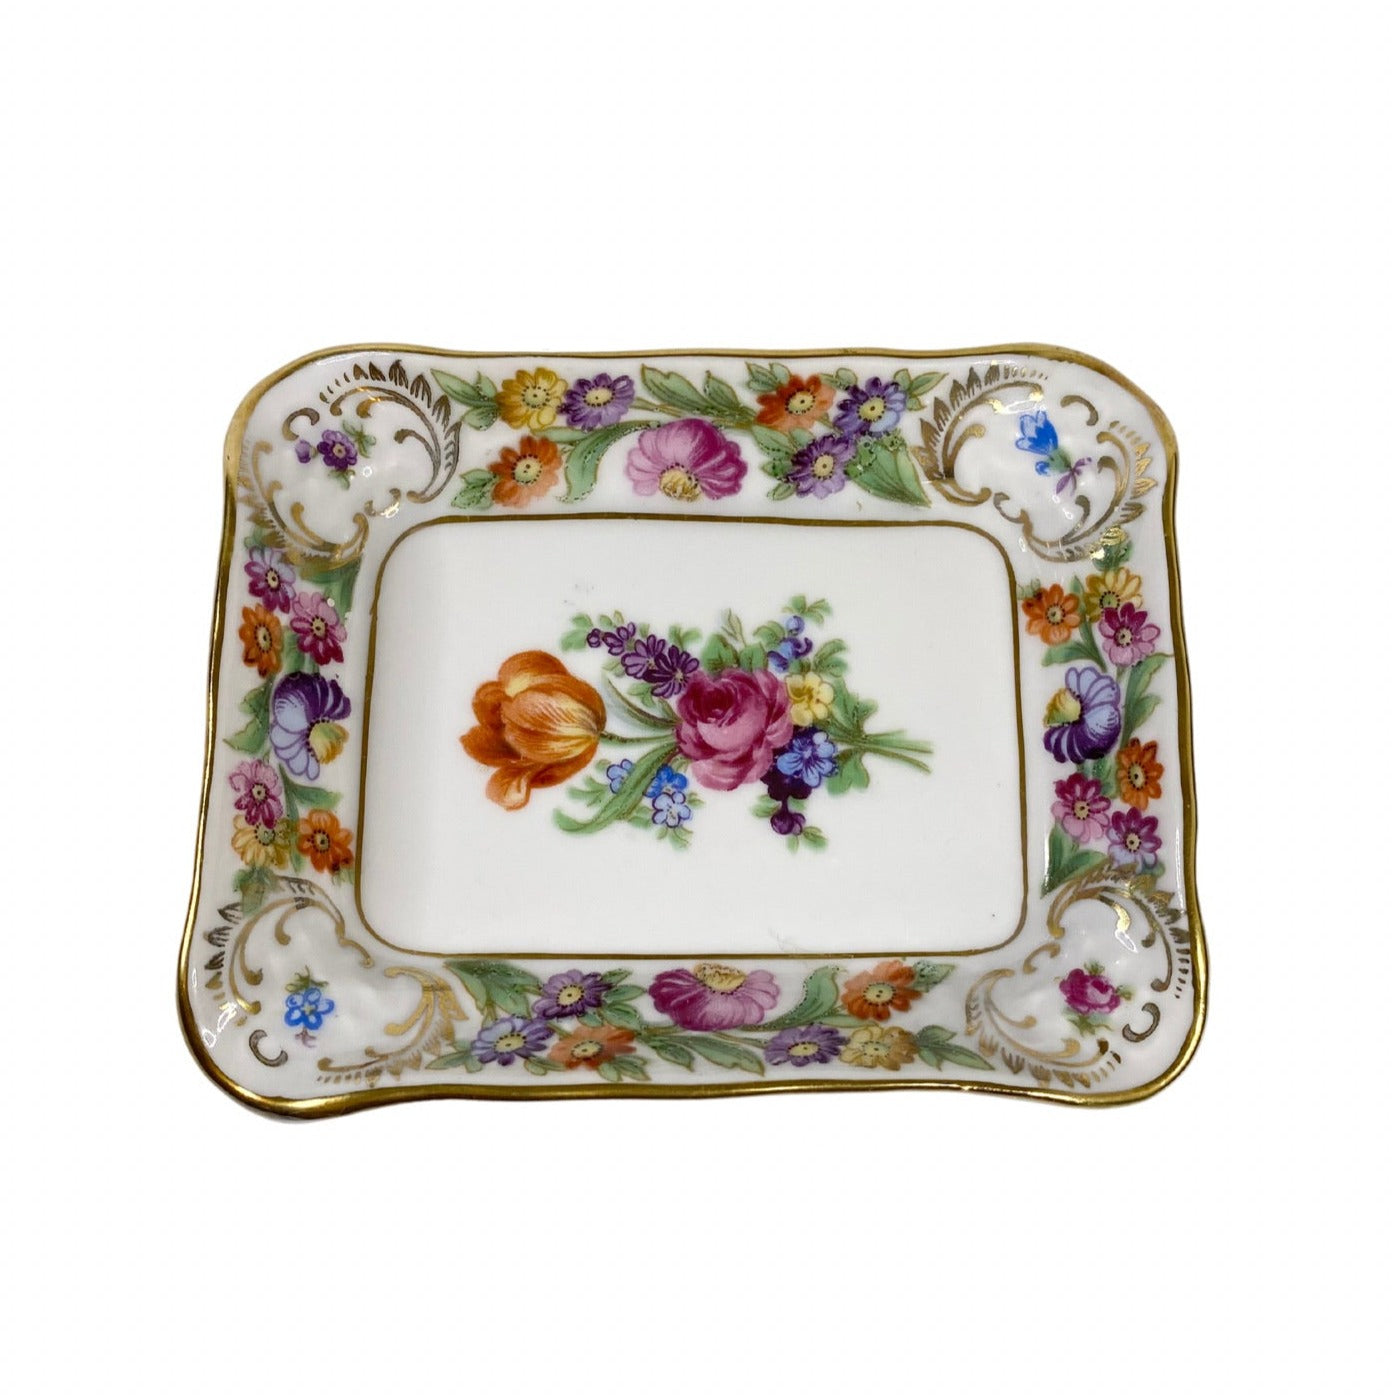 ECLECTIC DRESDEN FLOWERS ASHTRAY